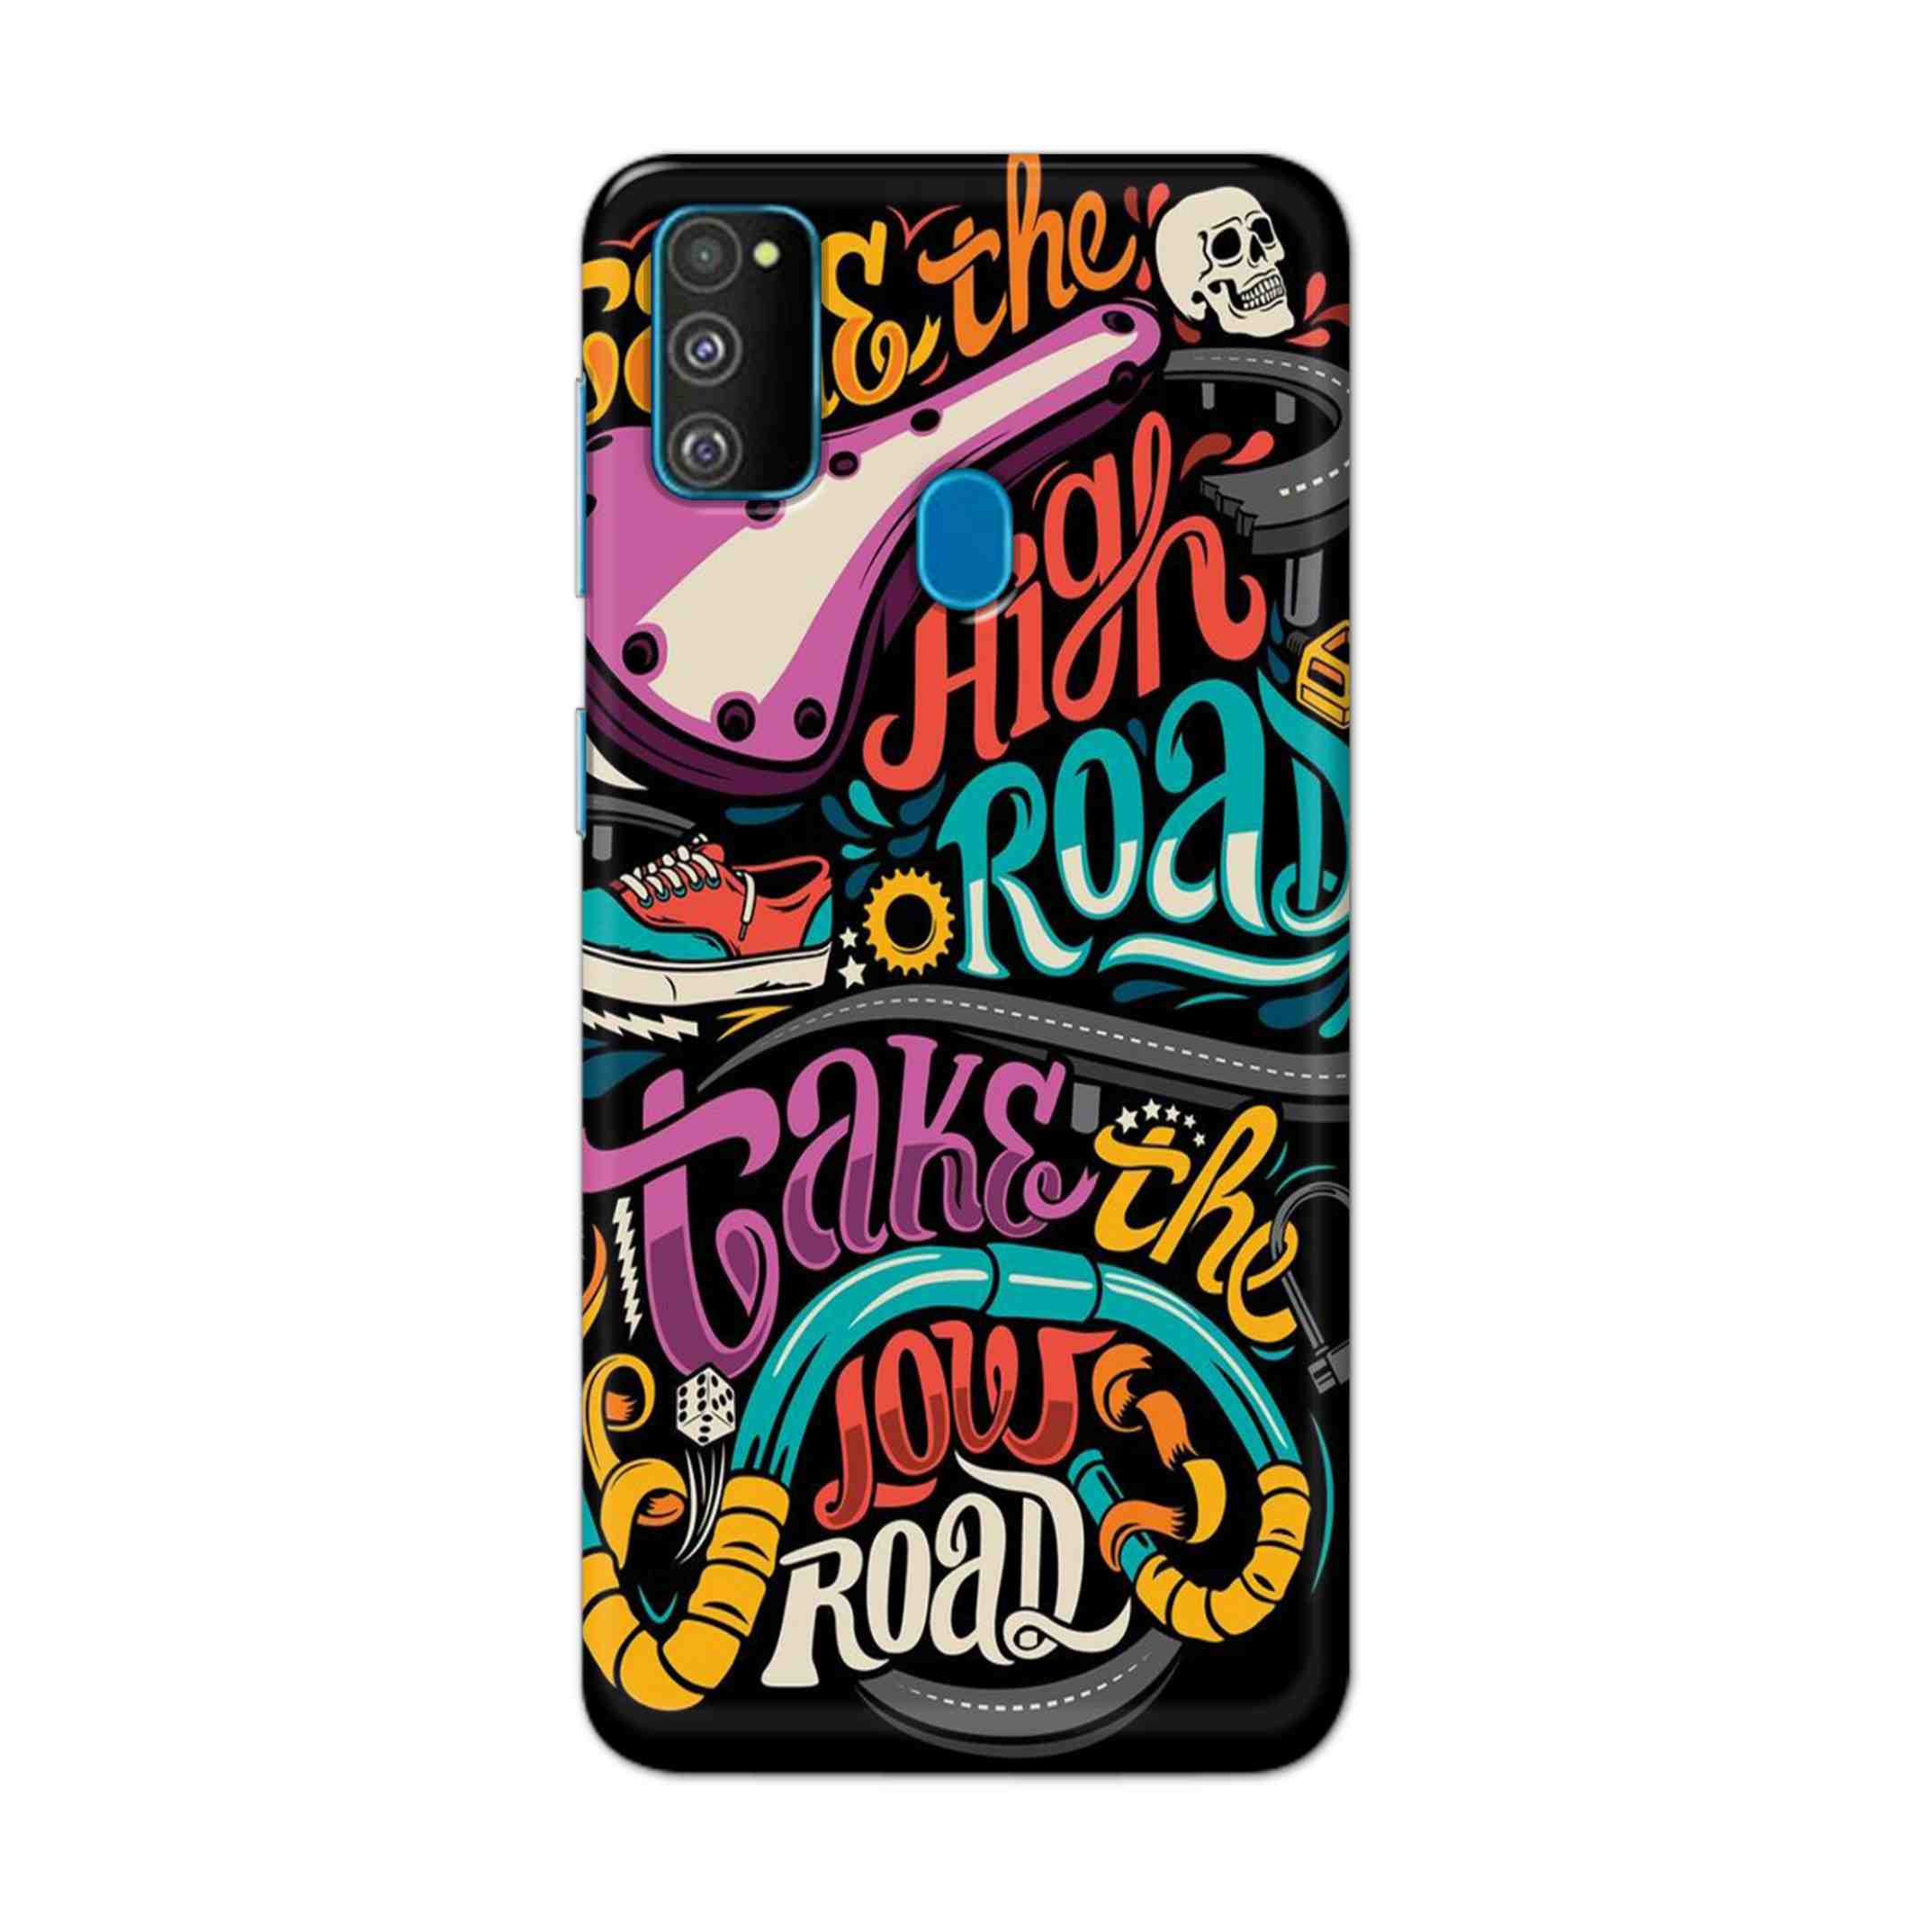 Buy Take The High Road Hard Back Mobile Phone Case Cover For Samsung Galaxy M30s Online